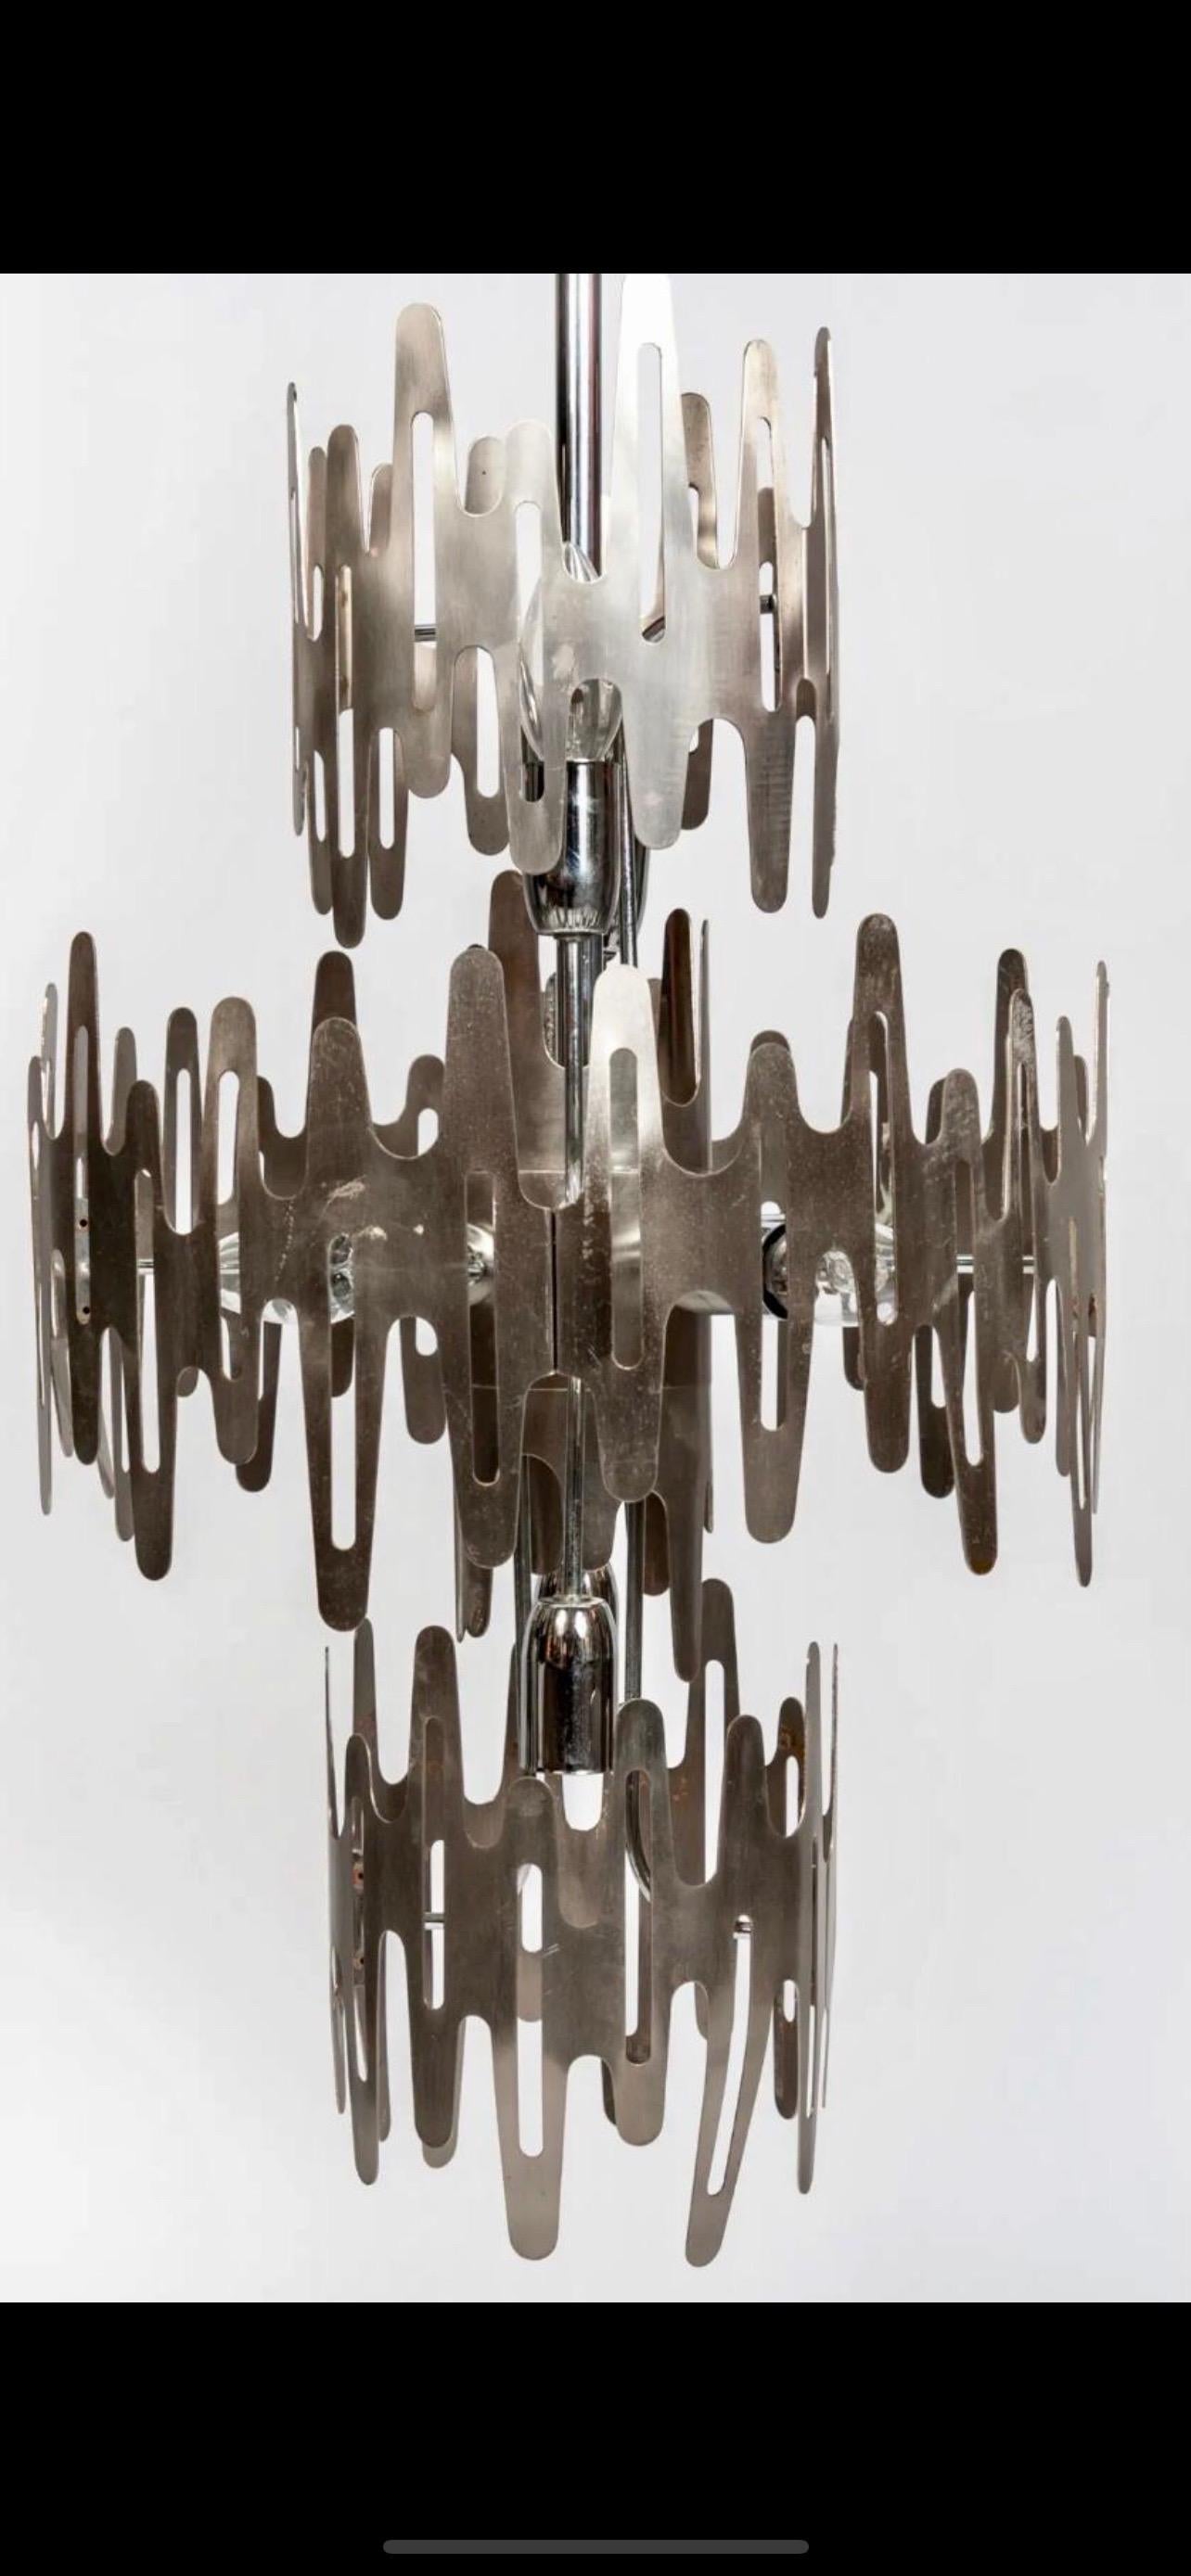 Unique model of brutalist chandelier in stainless steel, French work from the 70s. it is careful work and a true brutalist model.

special order from a French artist for a residence in Ibiza Spain. collector of exceptional brutalist pieces